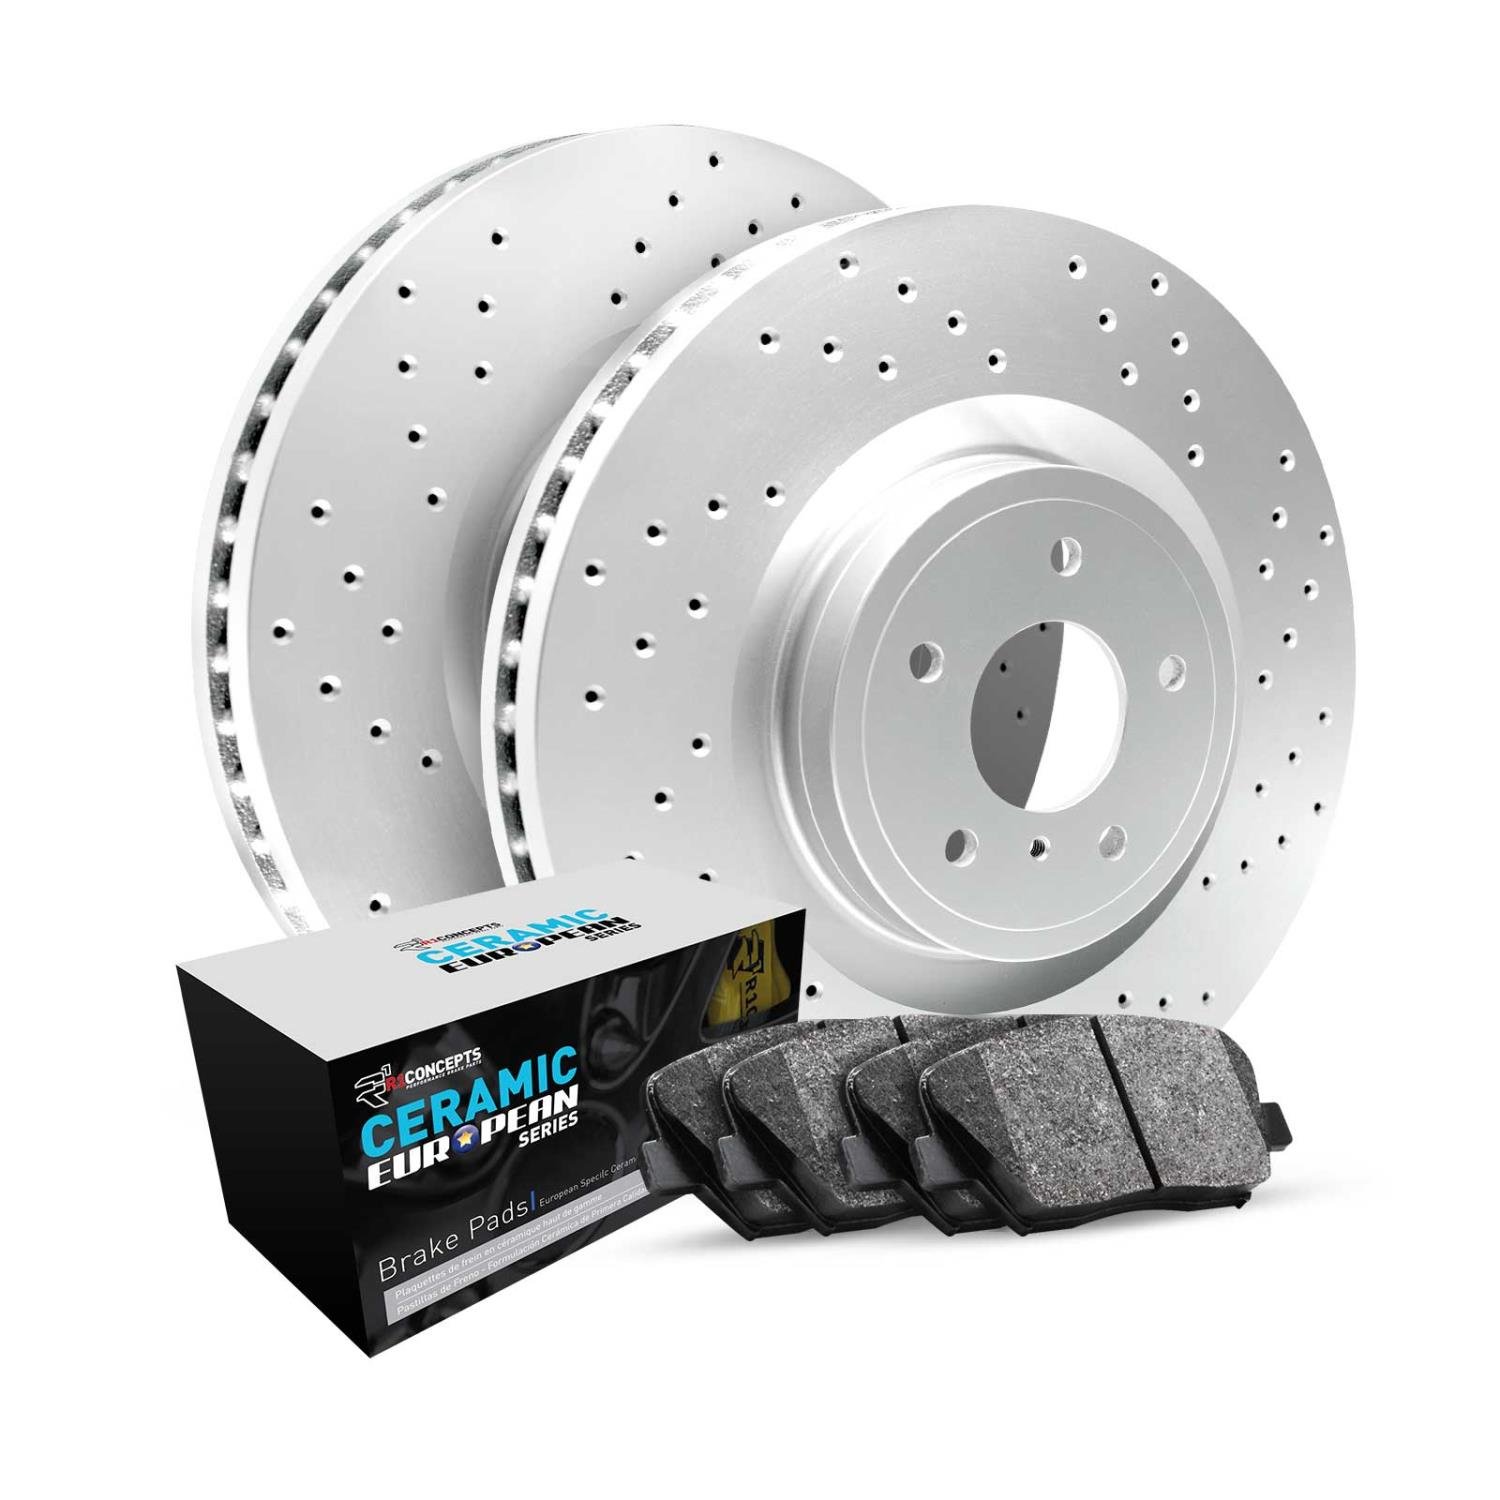 GEO-Carbon Drilled Brake Rotor Set w/Euro Ceramic Pads, Fits Select Fits Multiple Makes/Models, Position: Rear